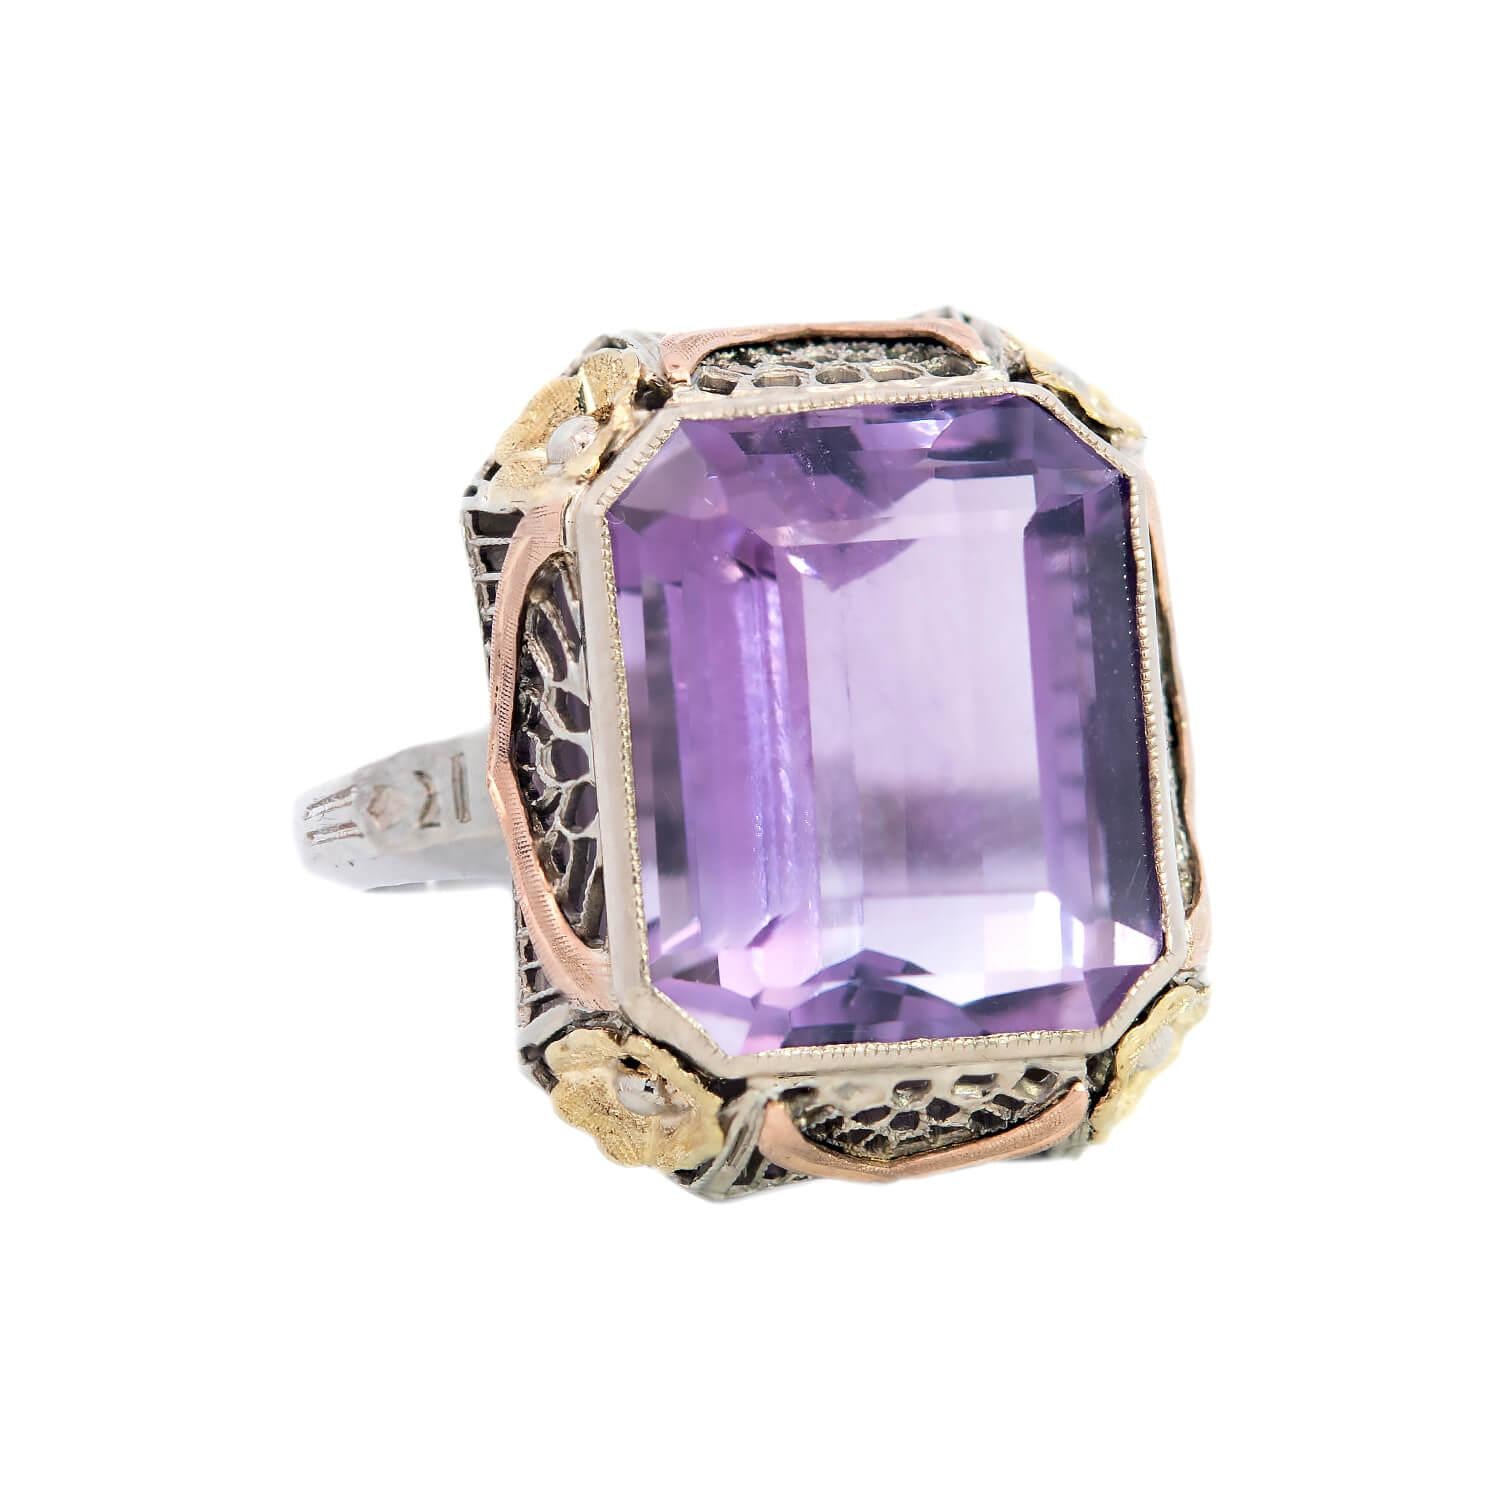 Art Deco 14k White, Yellow, and Rose Gold Amethyst Filagree Floral Cocktail Ring